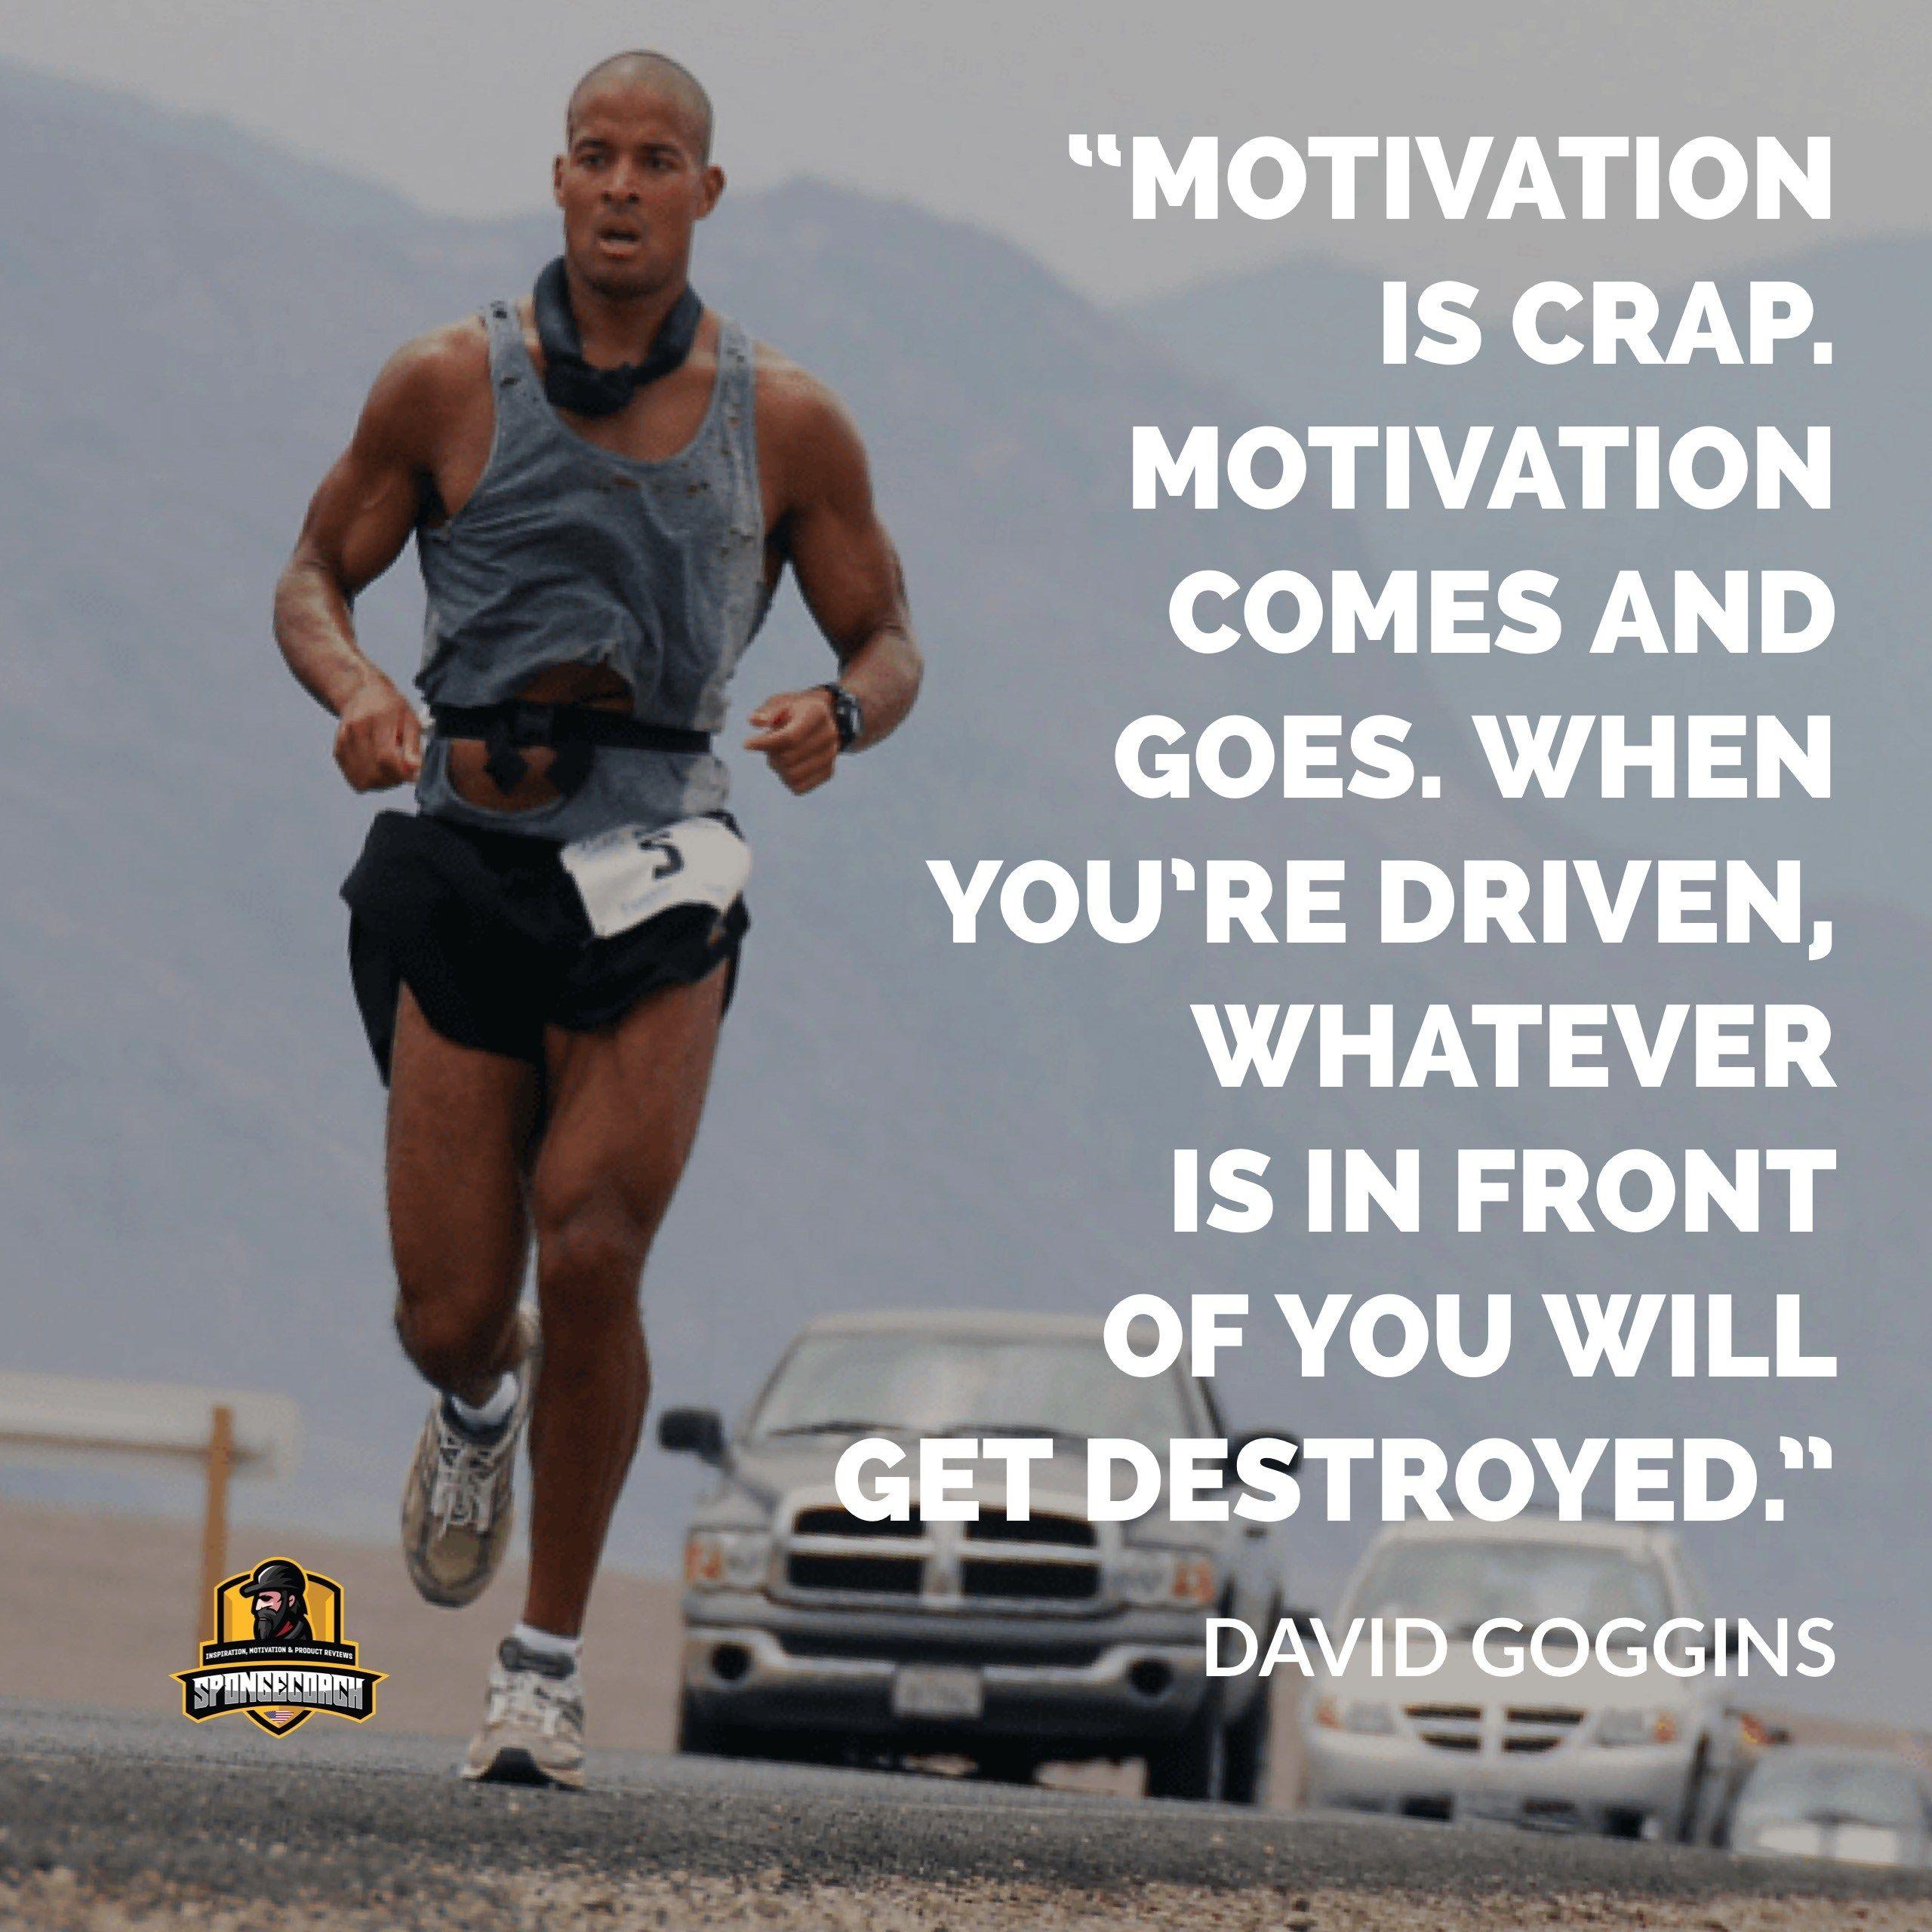 David Goggins quote 1080P 2k 4k HD wallpapers backgrounds free download   Rare Gallery